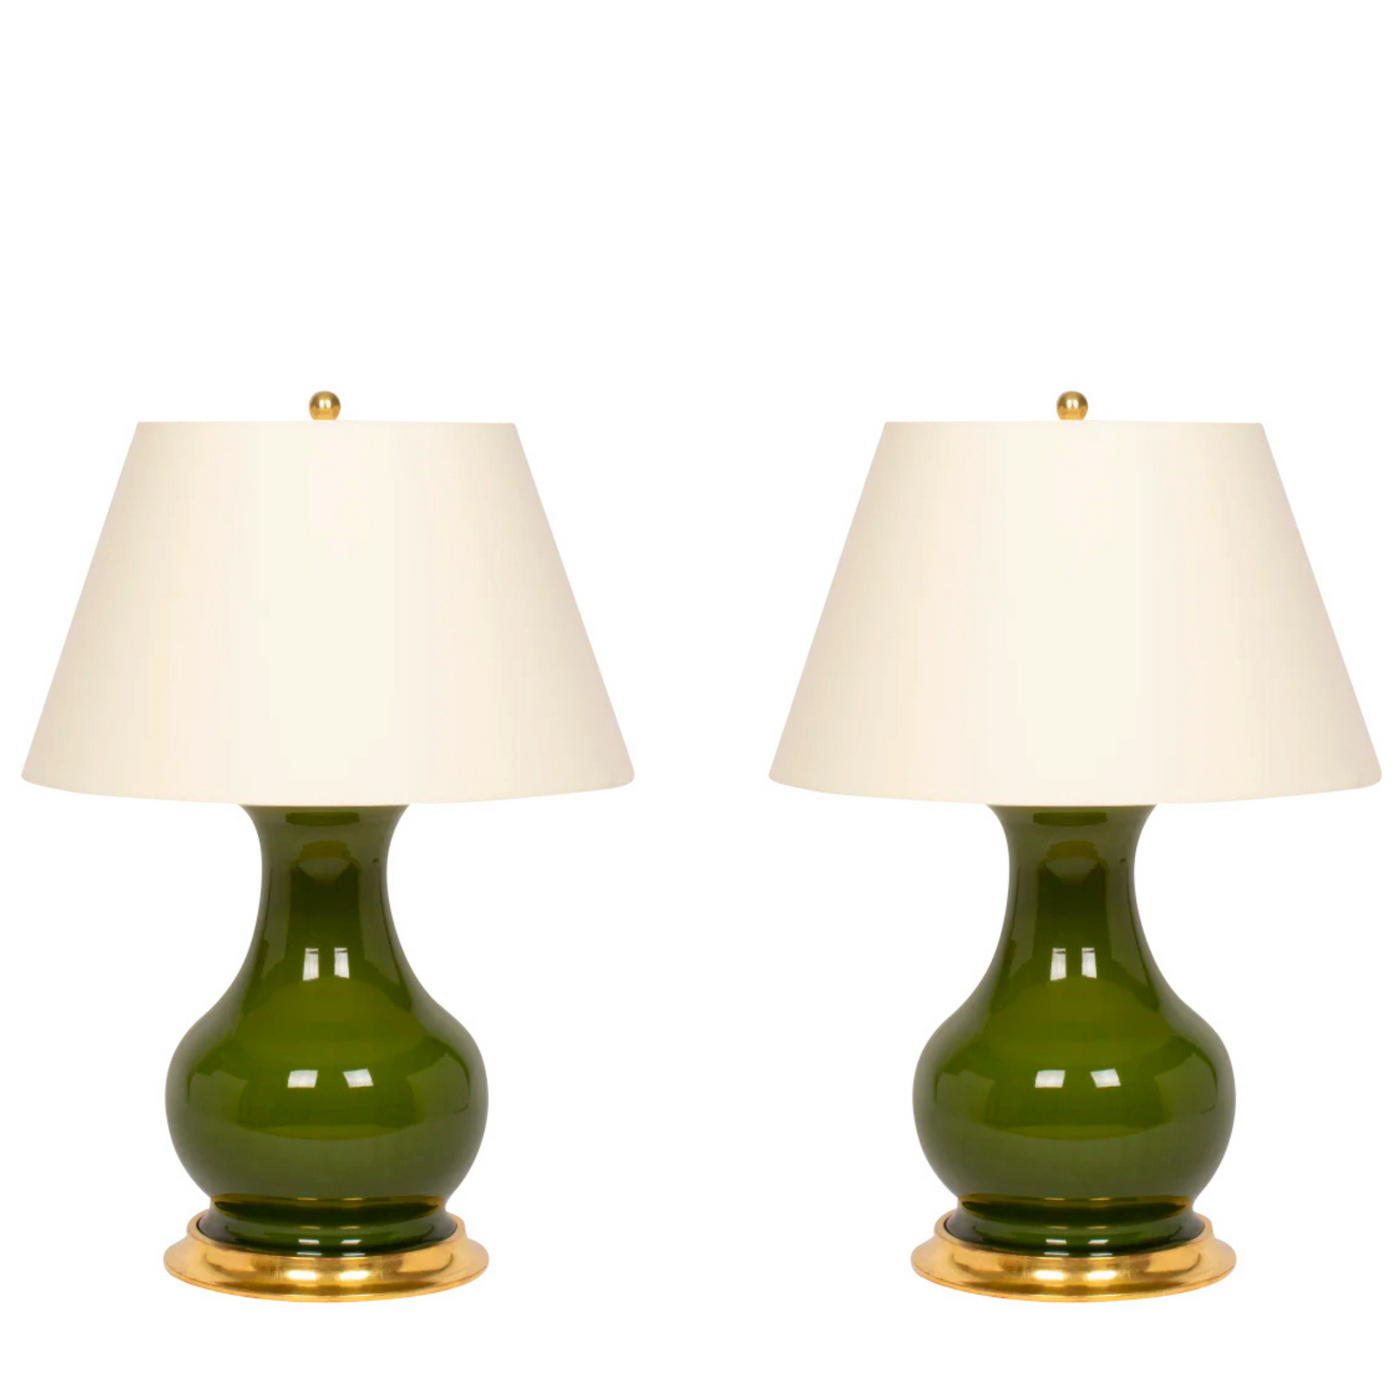 A Pair of Large Hann Table Lamps in Spruce by Christopher Spitzmiller | Newport Lamp And Shade | Located in Newport, RI